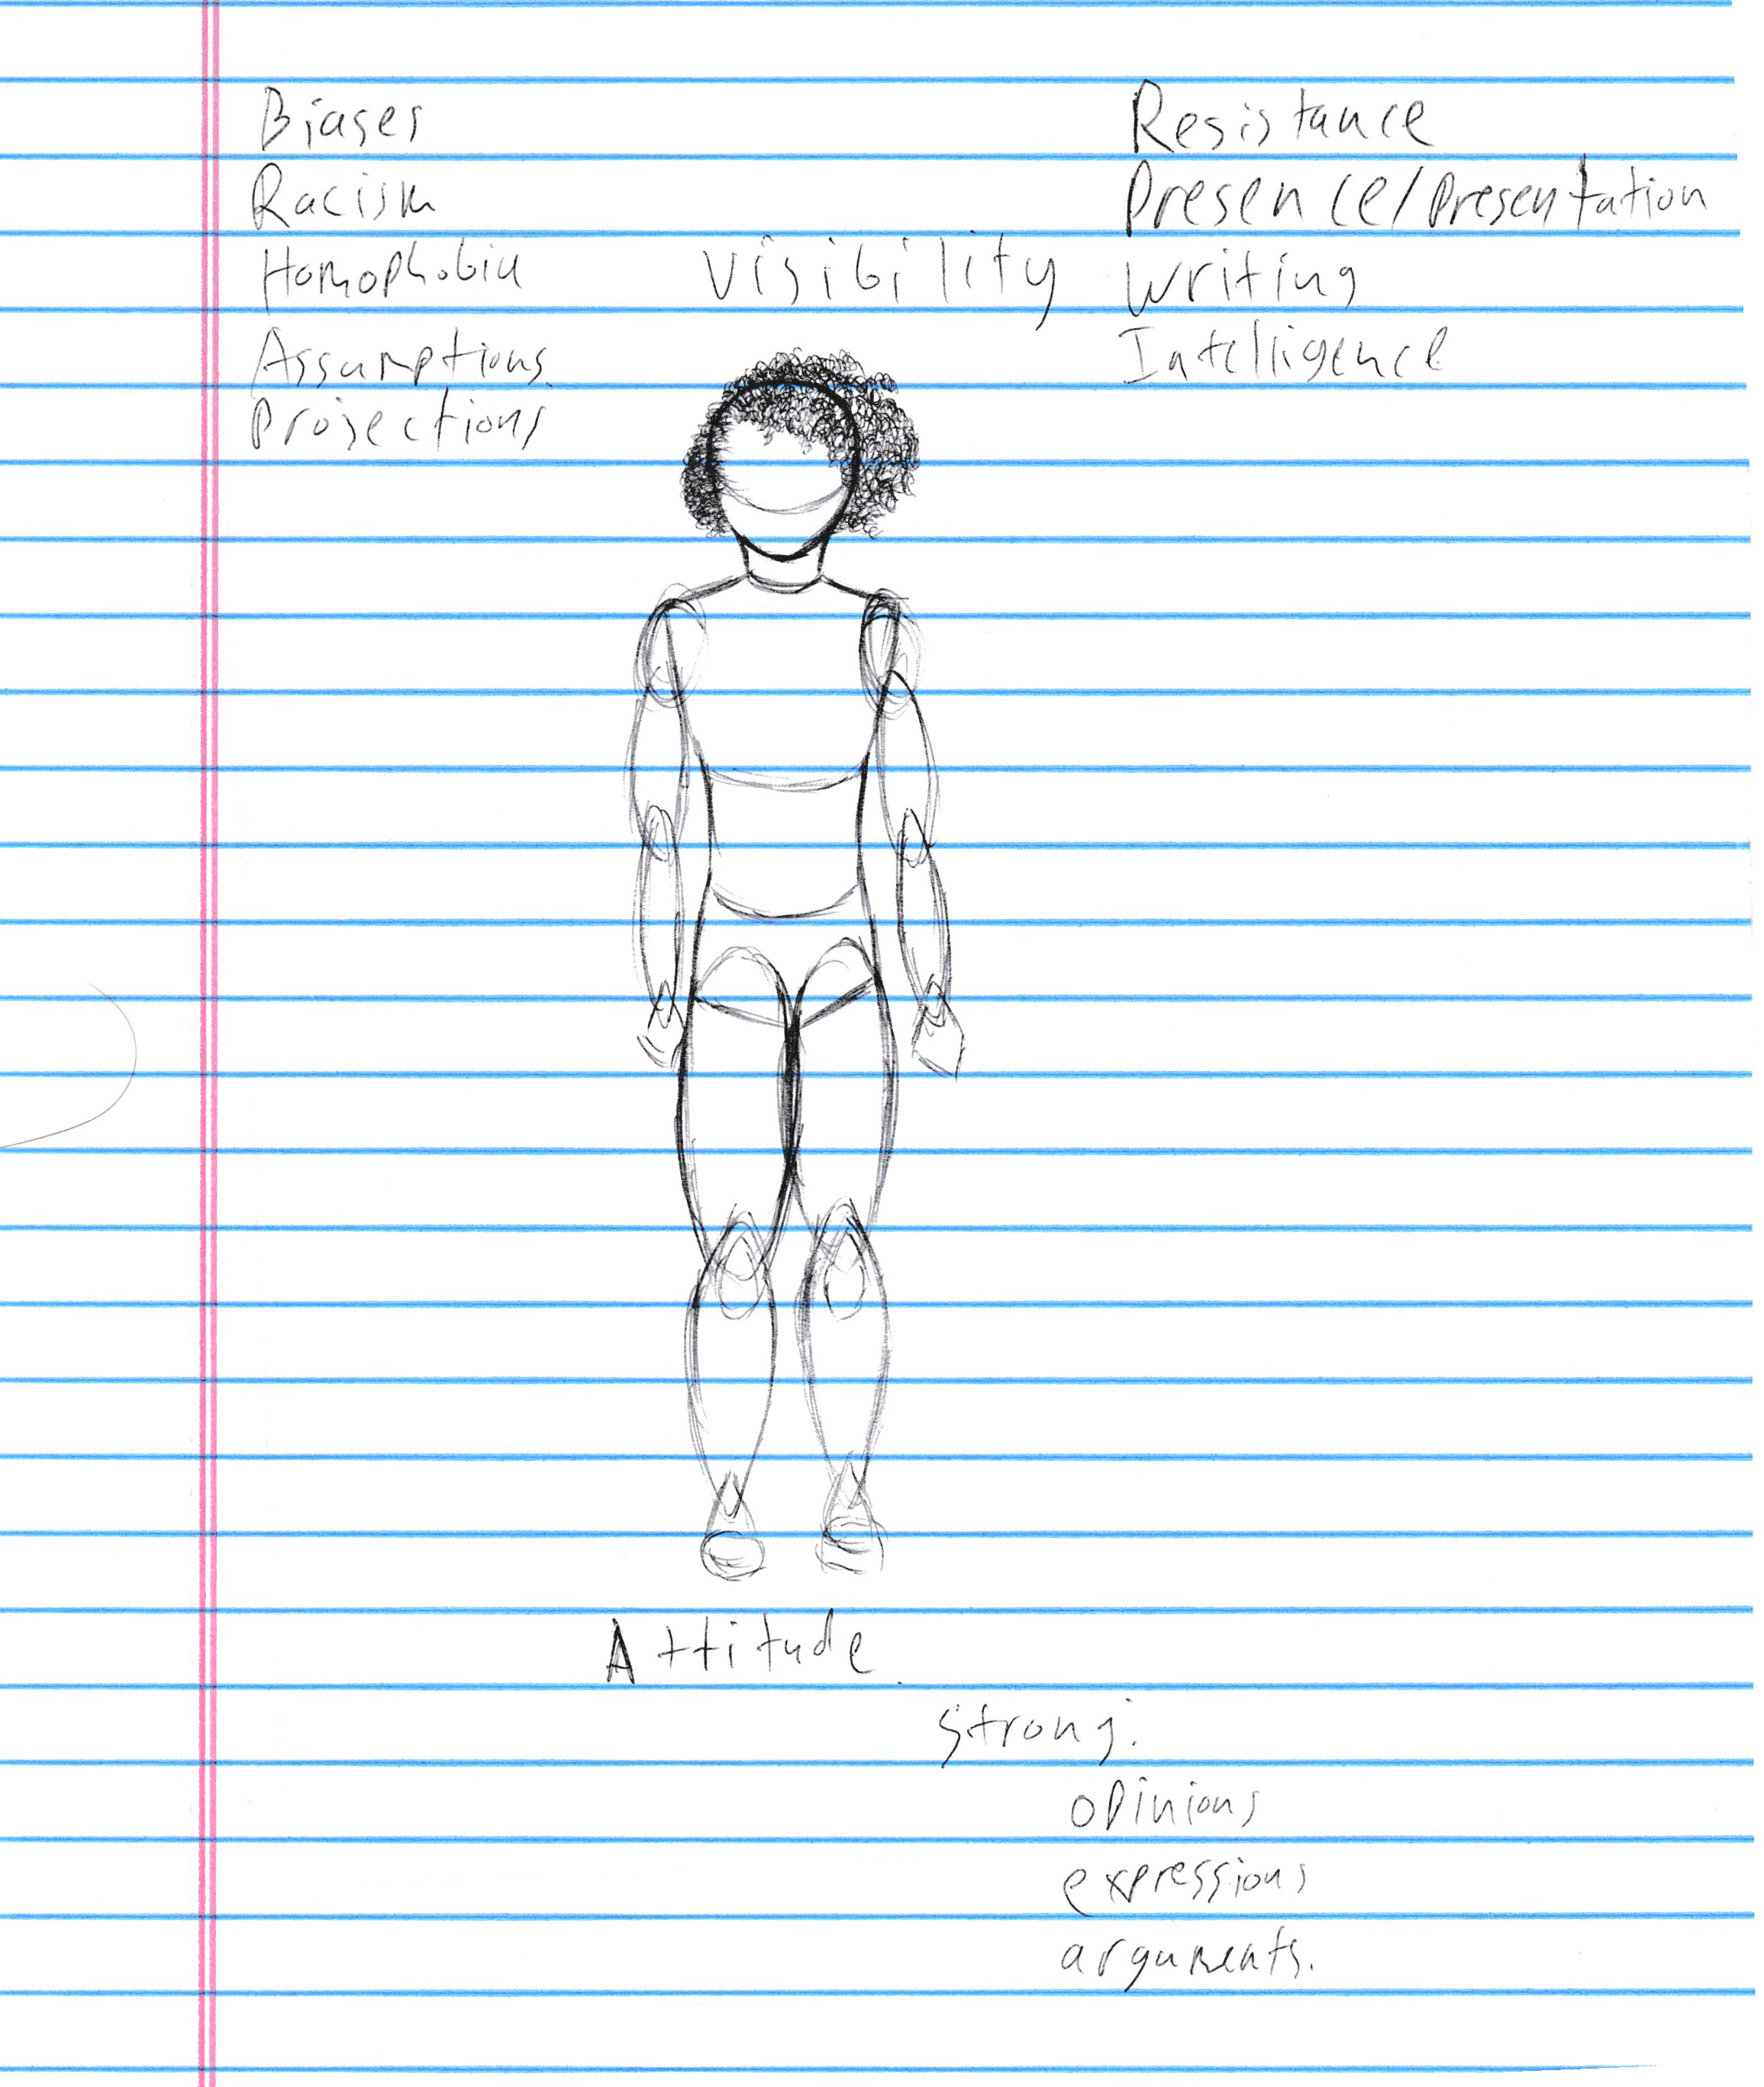 Image 9 - This image shows a hand drawn self portrait of Janae with words (racism, homophobia, resistance, writing, etc.) in response to Self & Power exercise.